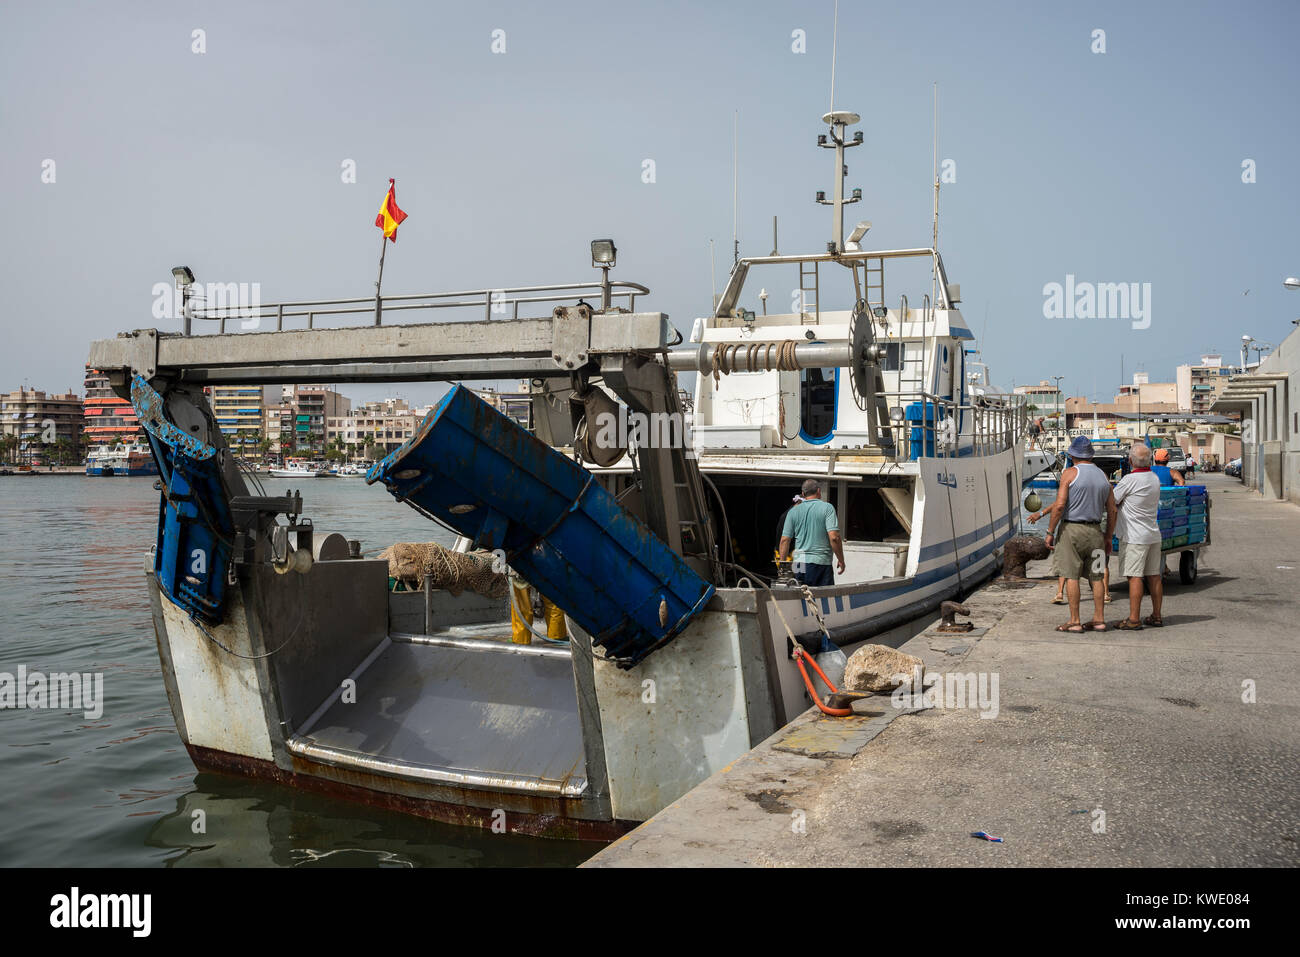 Fishing boats unloading fish in the port of Santa Pola, Alicante, Spain, on July 21, 2016 Stock Photo